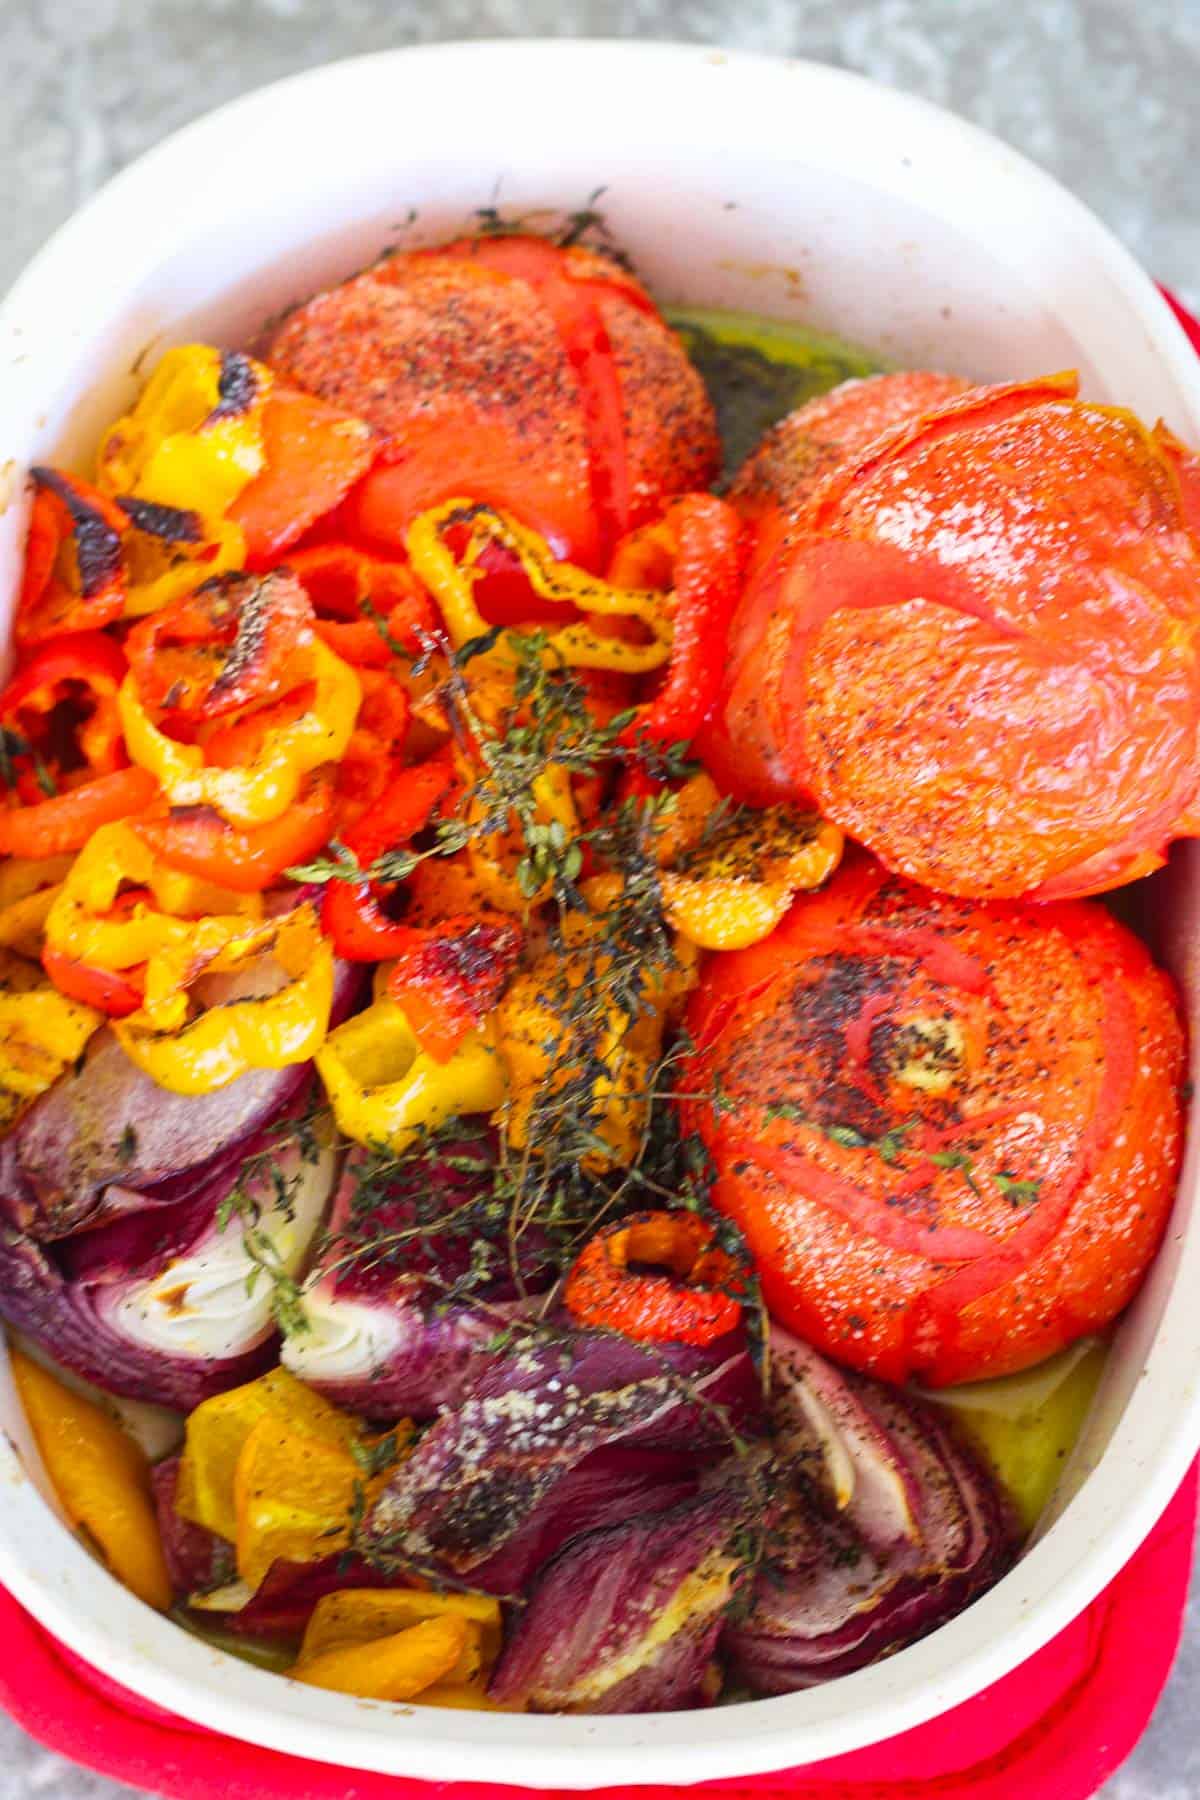 Tomatoes, peppers, onions and herbs on the baking tray after roasting.